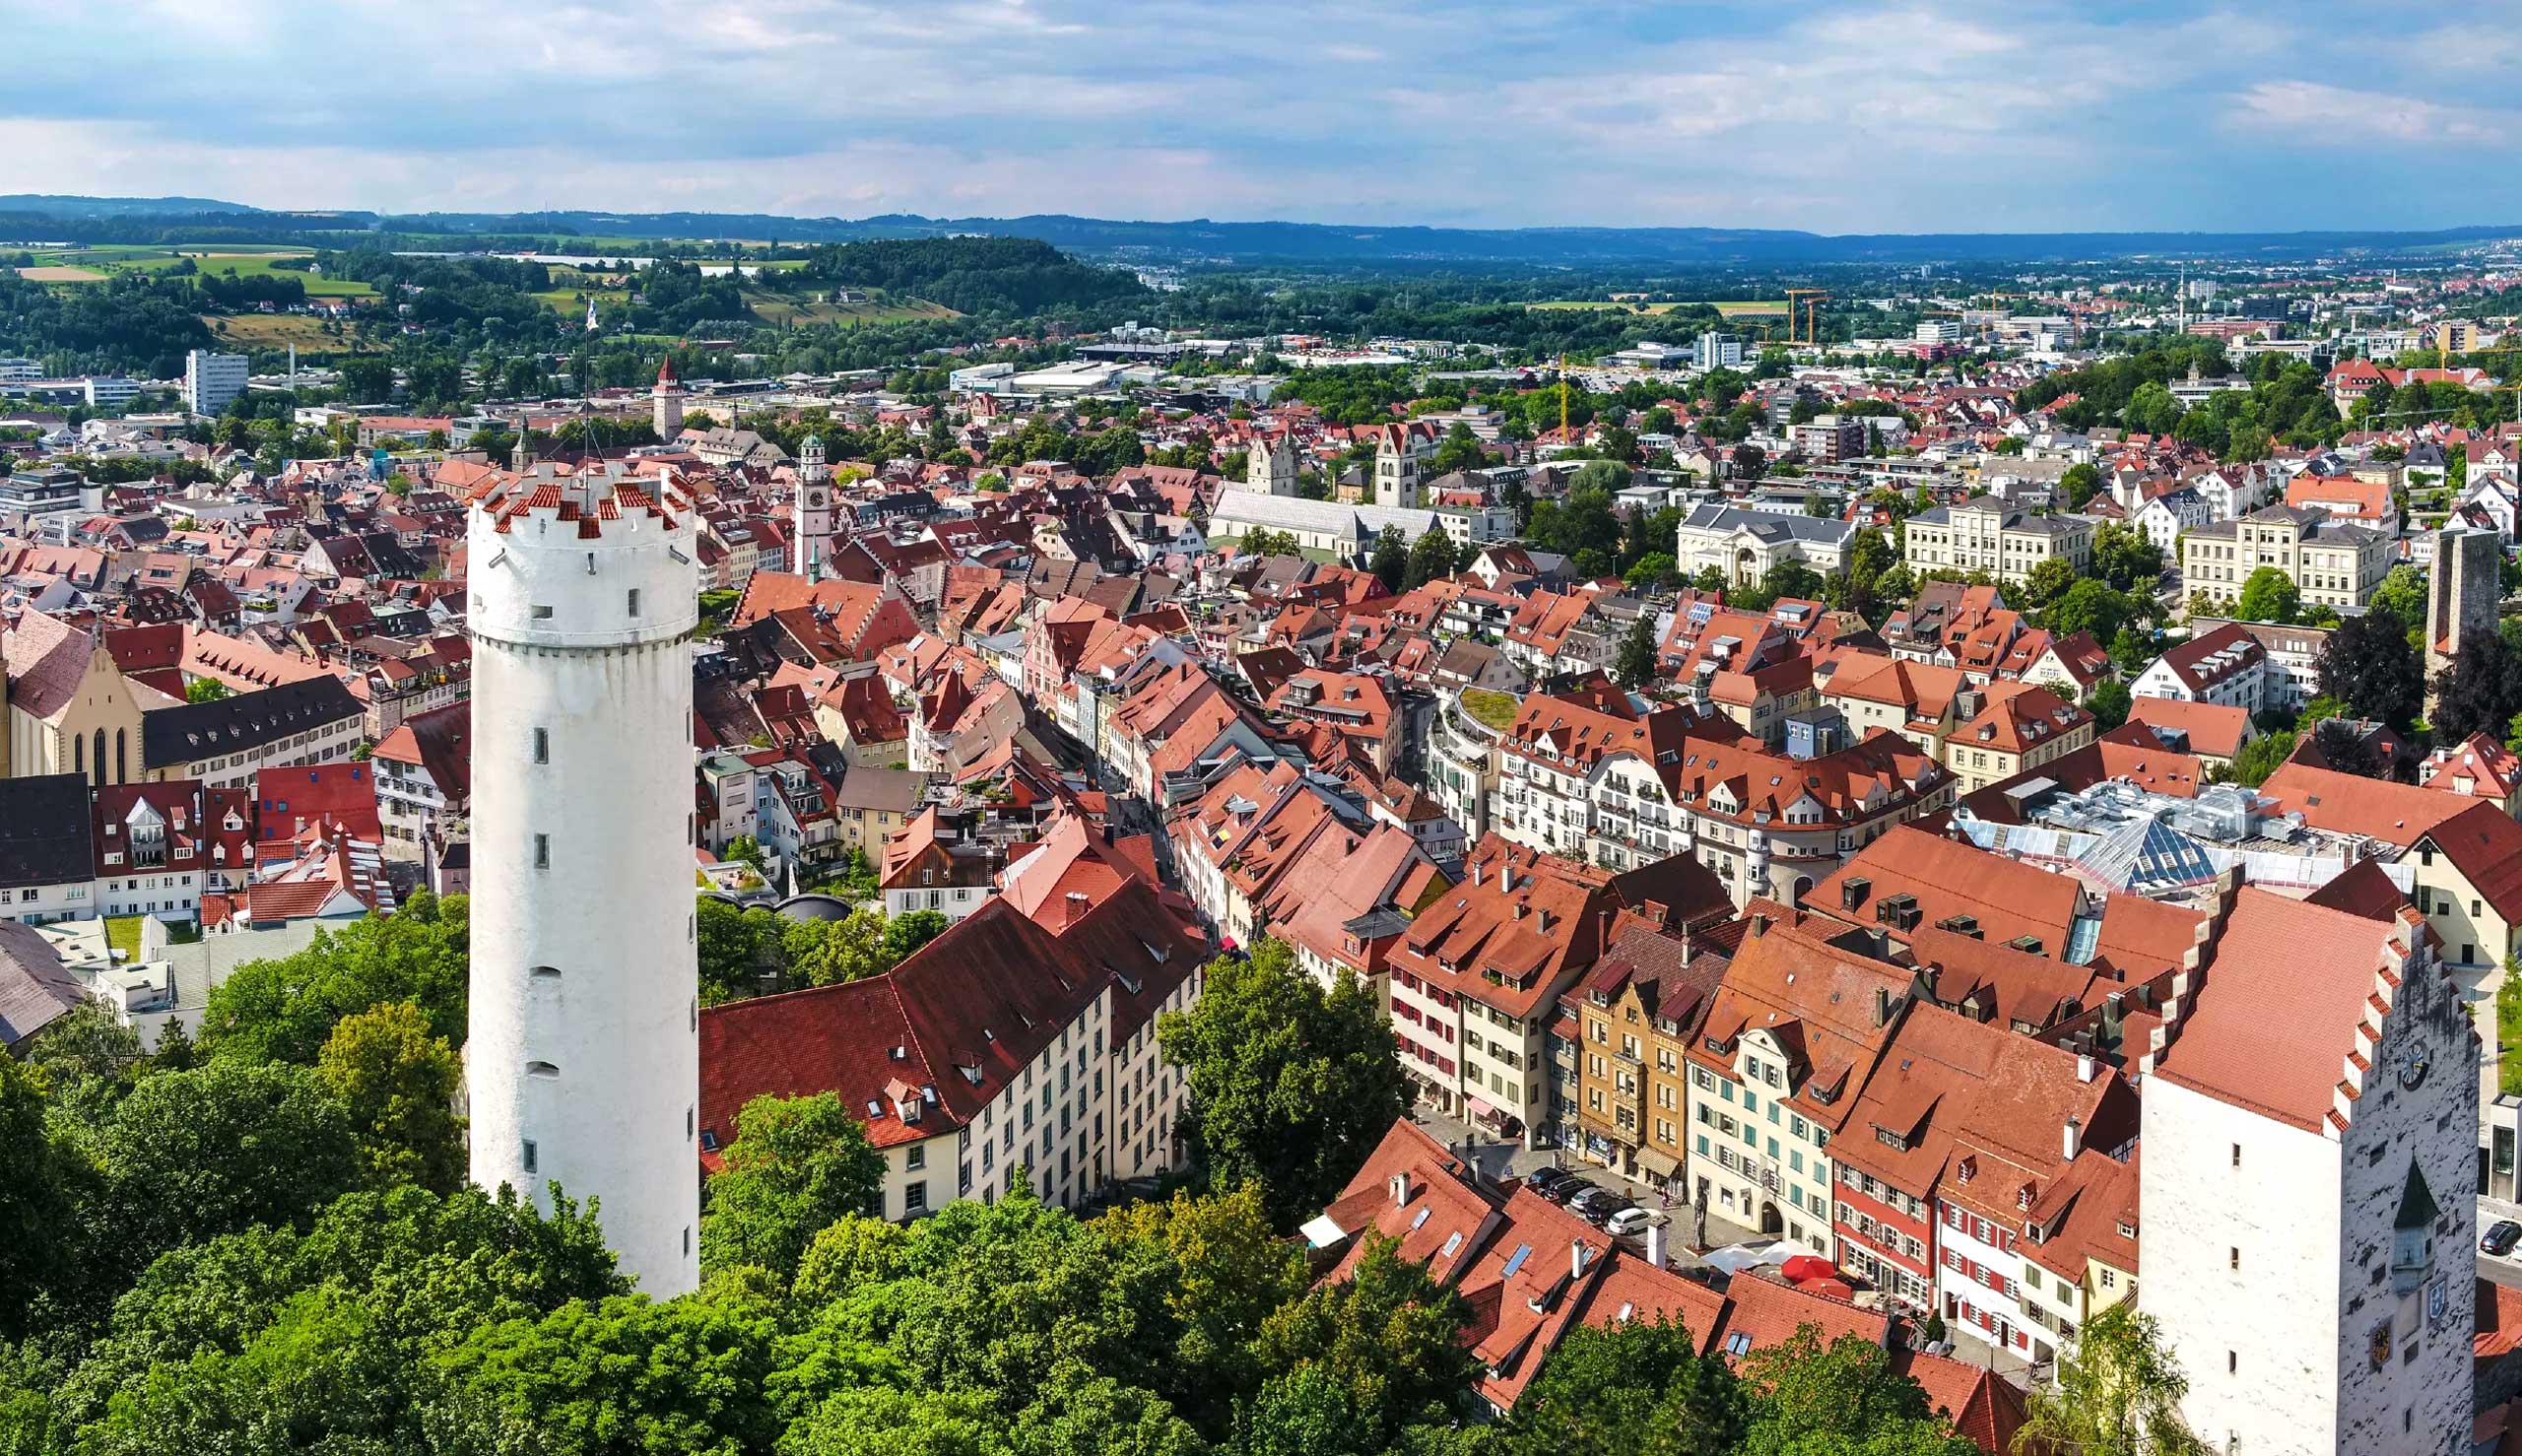 The city of Ravensburg is located in the popular travel region of Lake Constance-Upper Swabia-Allgäu and is also called the tower city. Copyright: City of Ravensburg / Felix Kästle